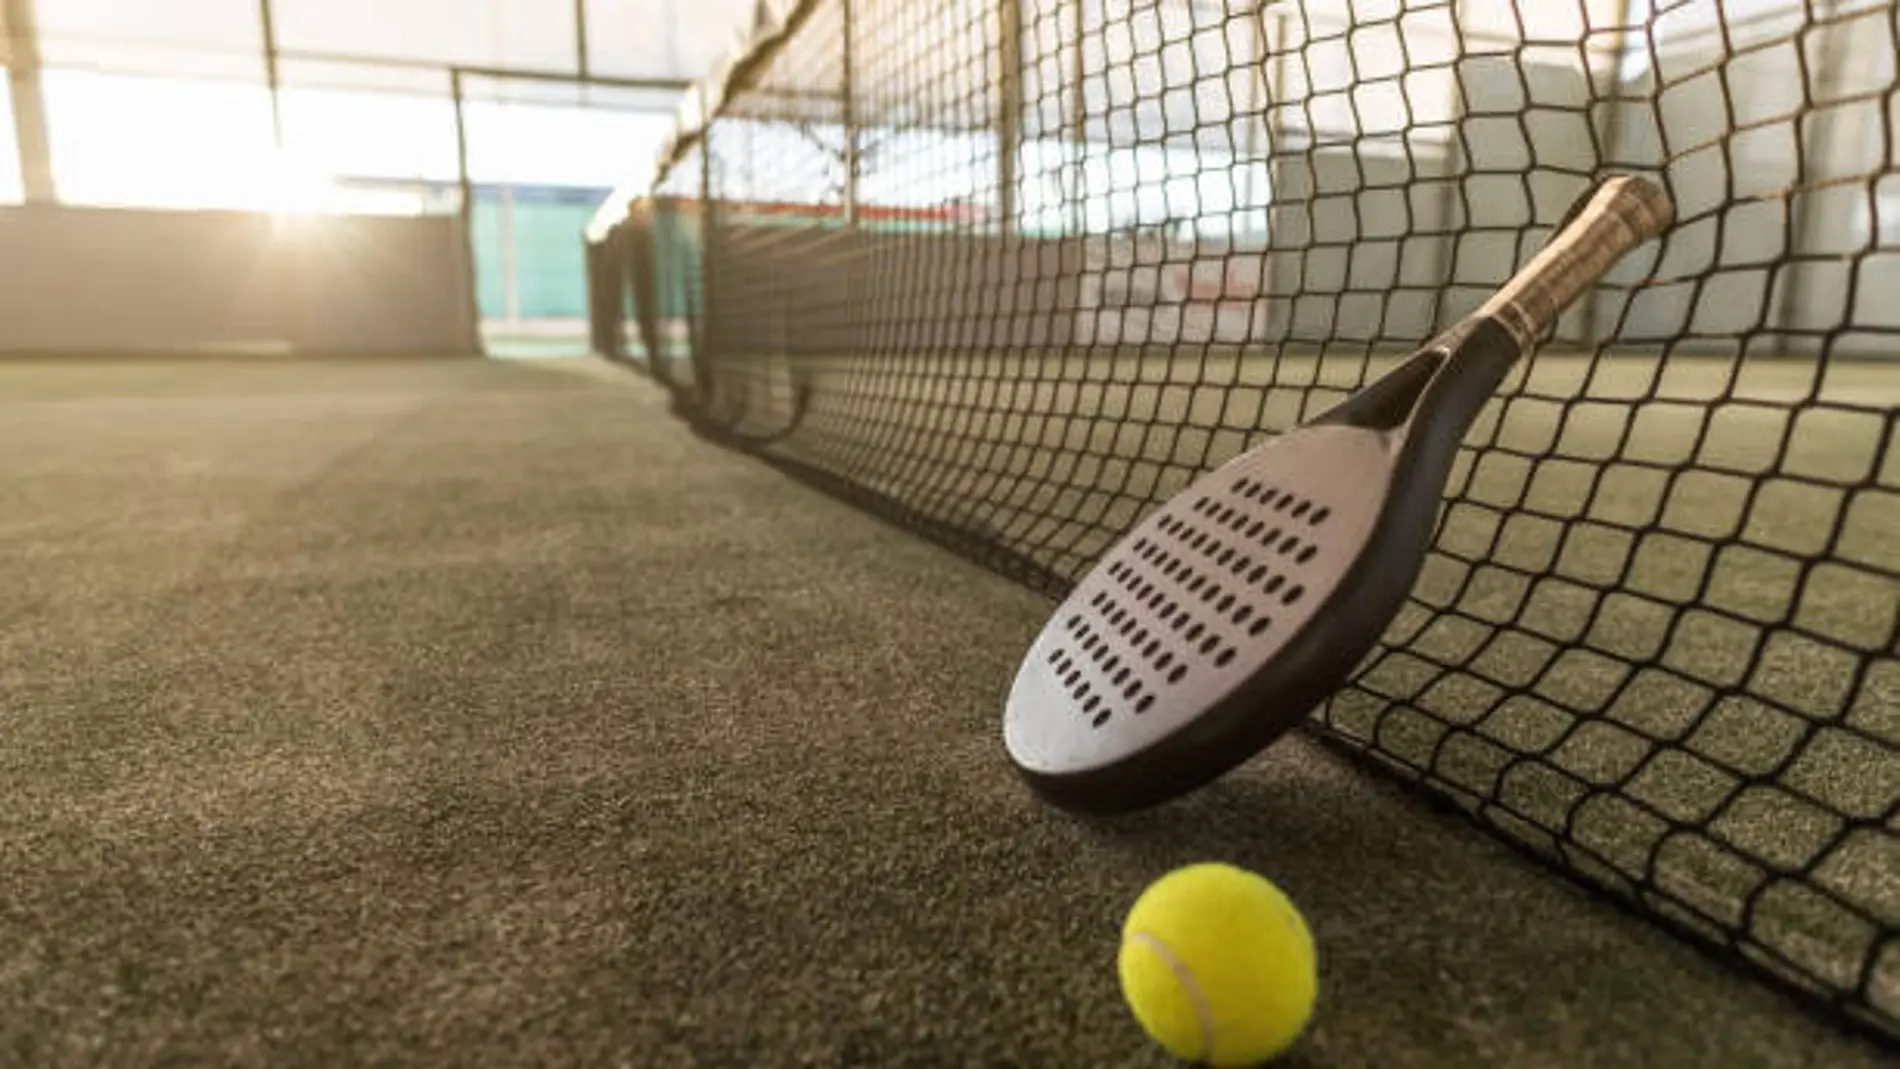 Paddle tennis image of outdoors court, racket, net and ball